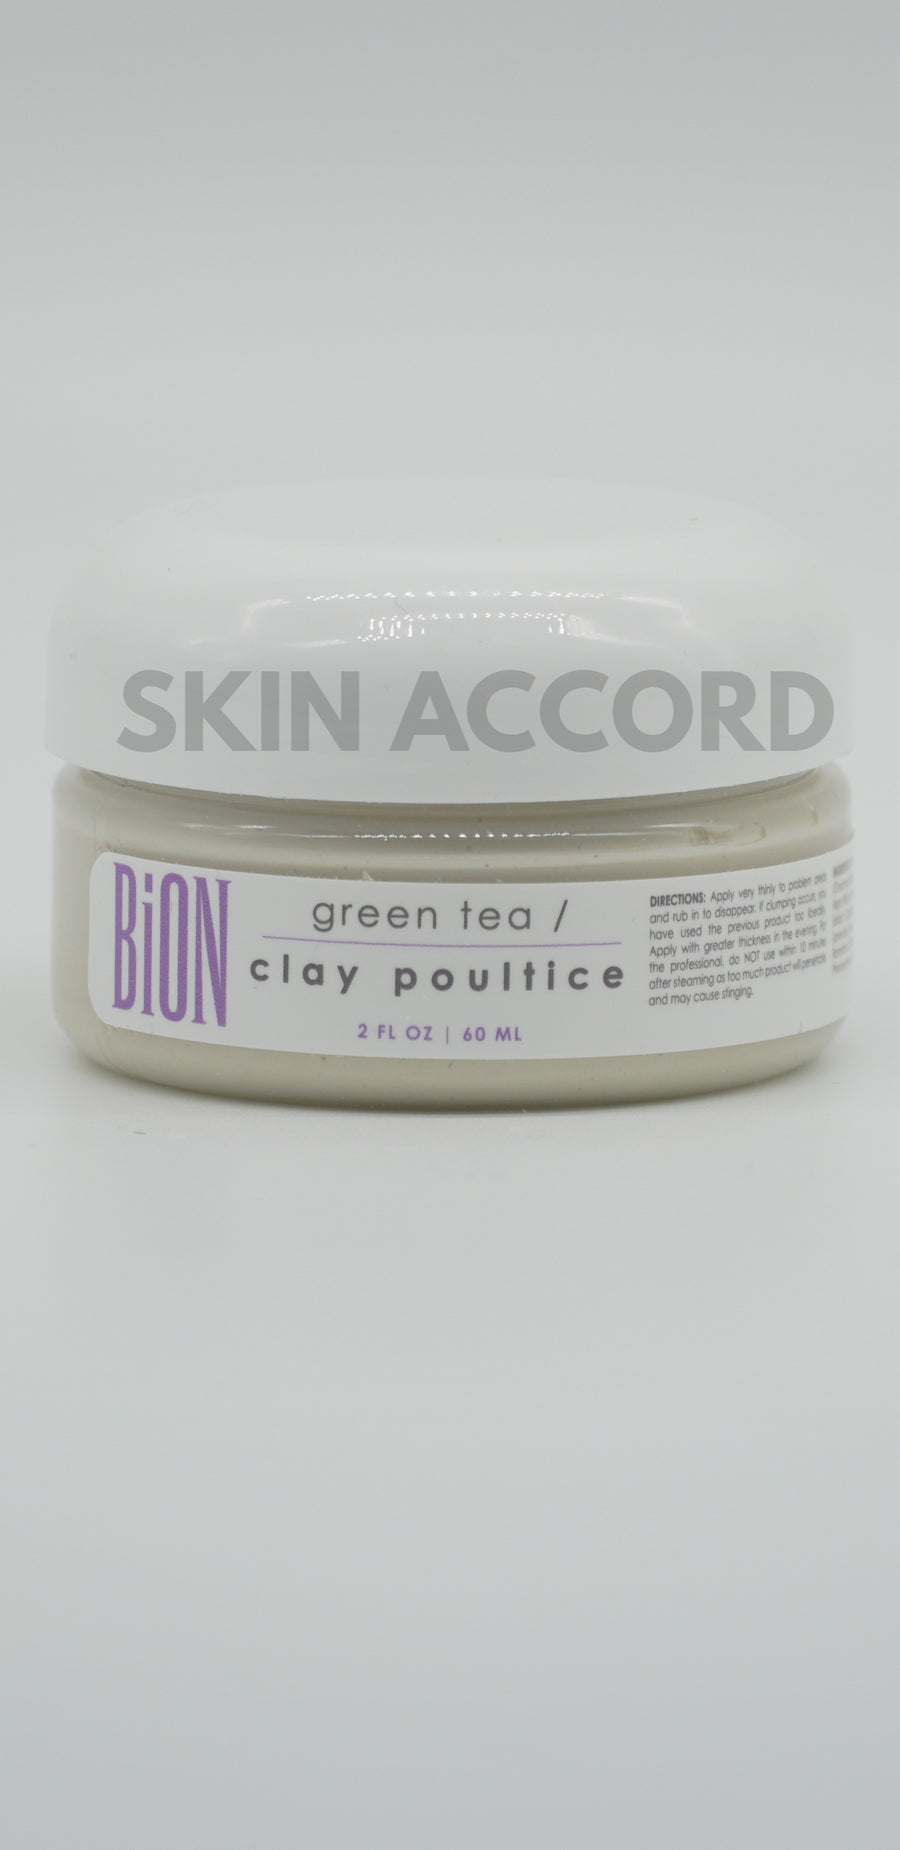 Bion Green Tea Clay Poultice